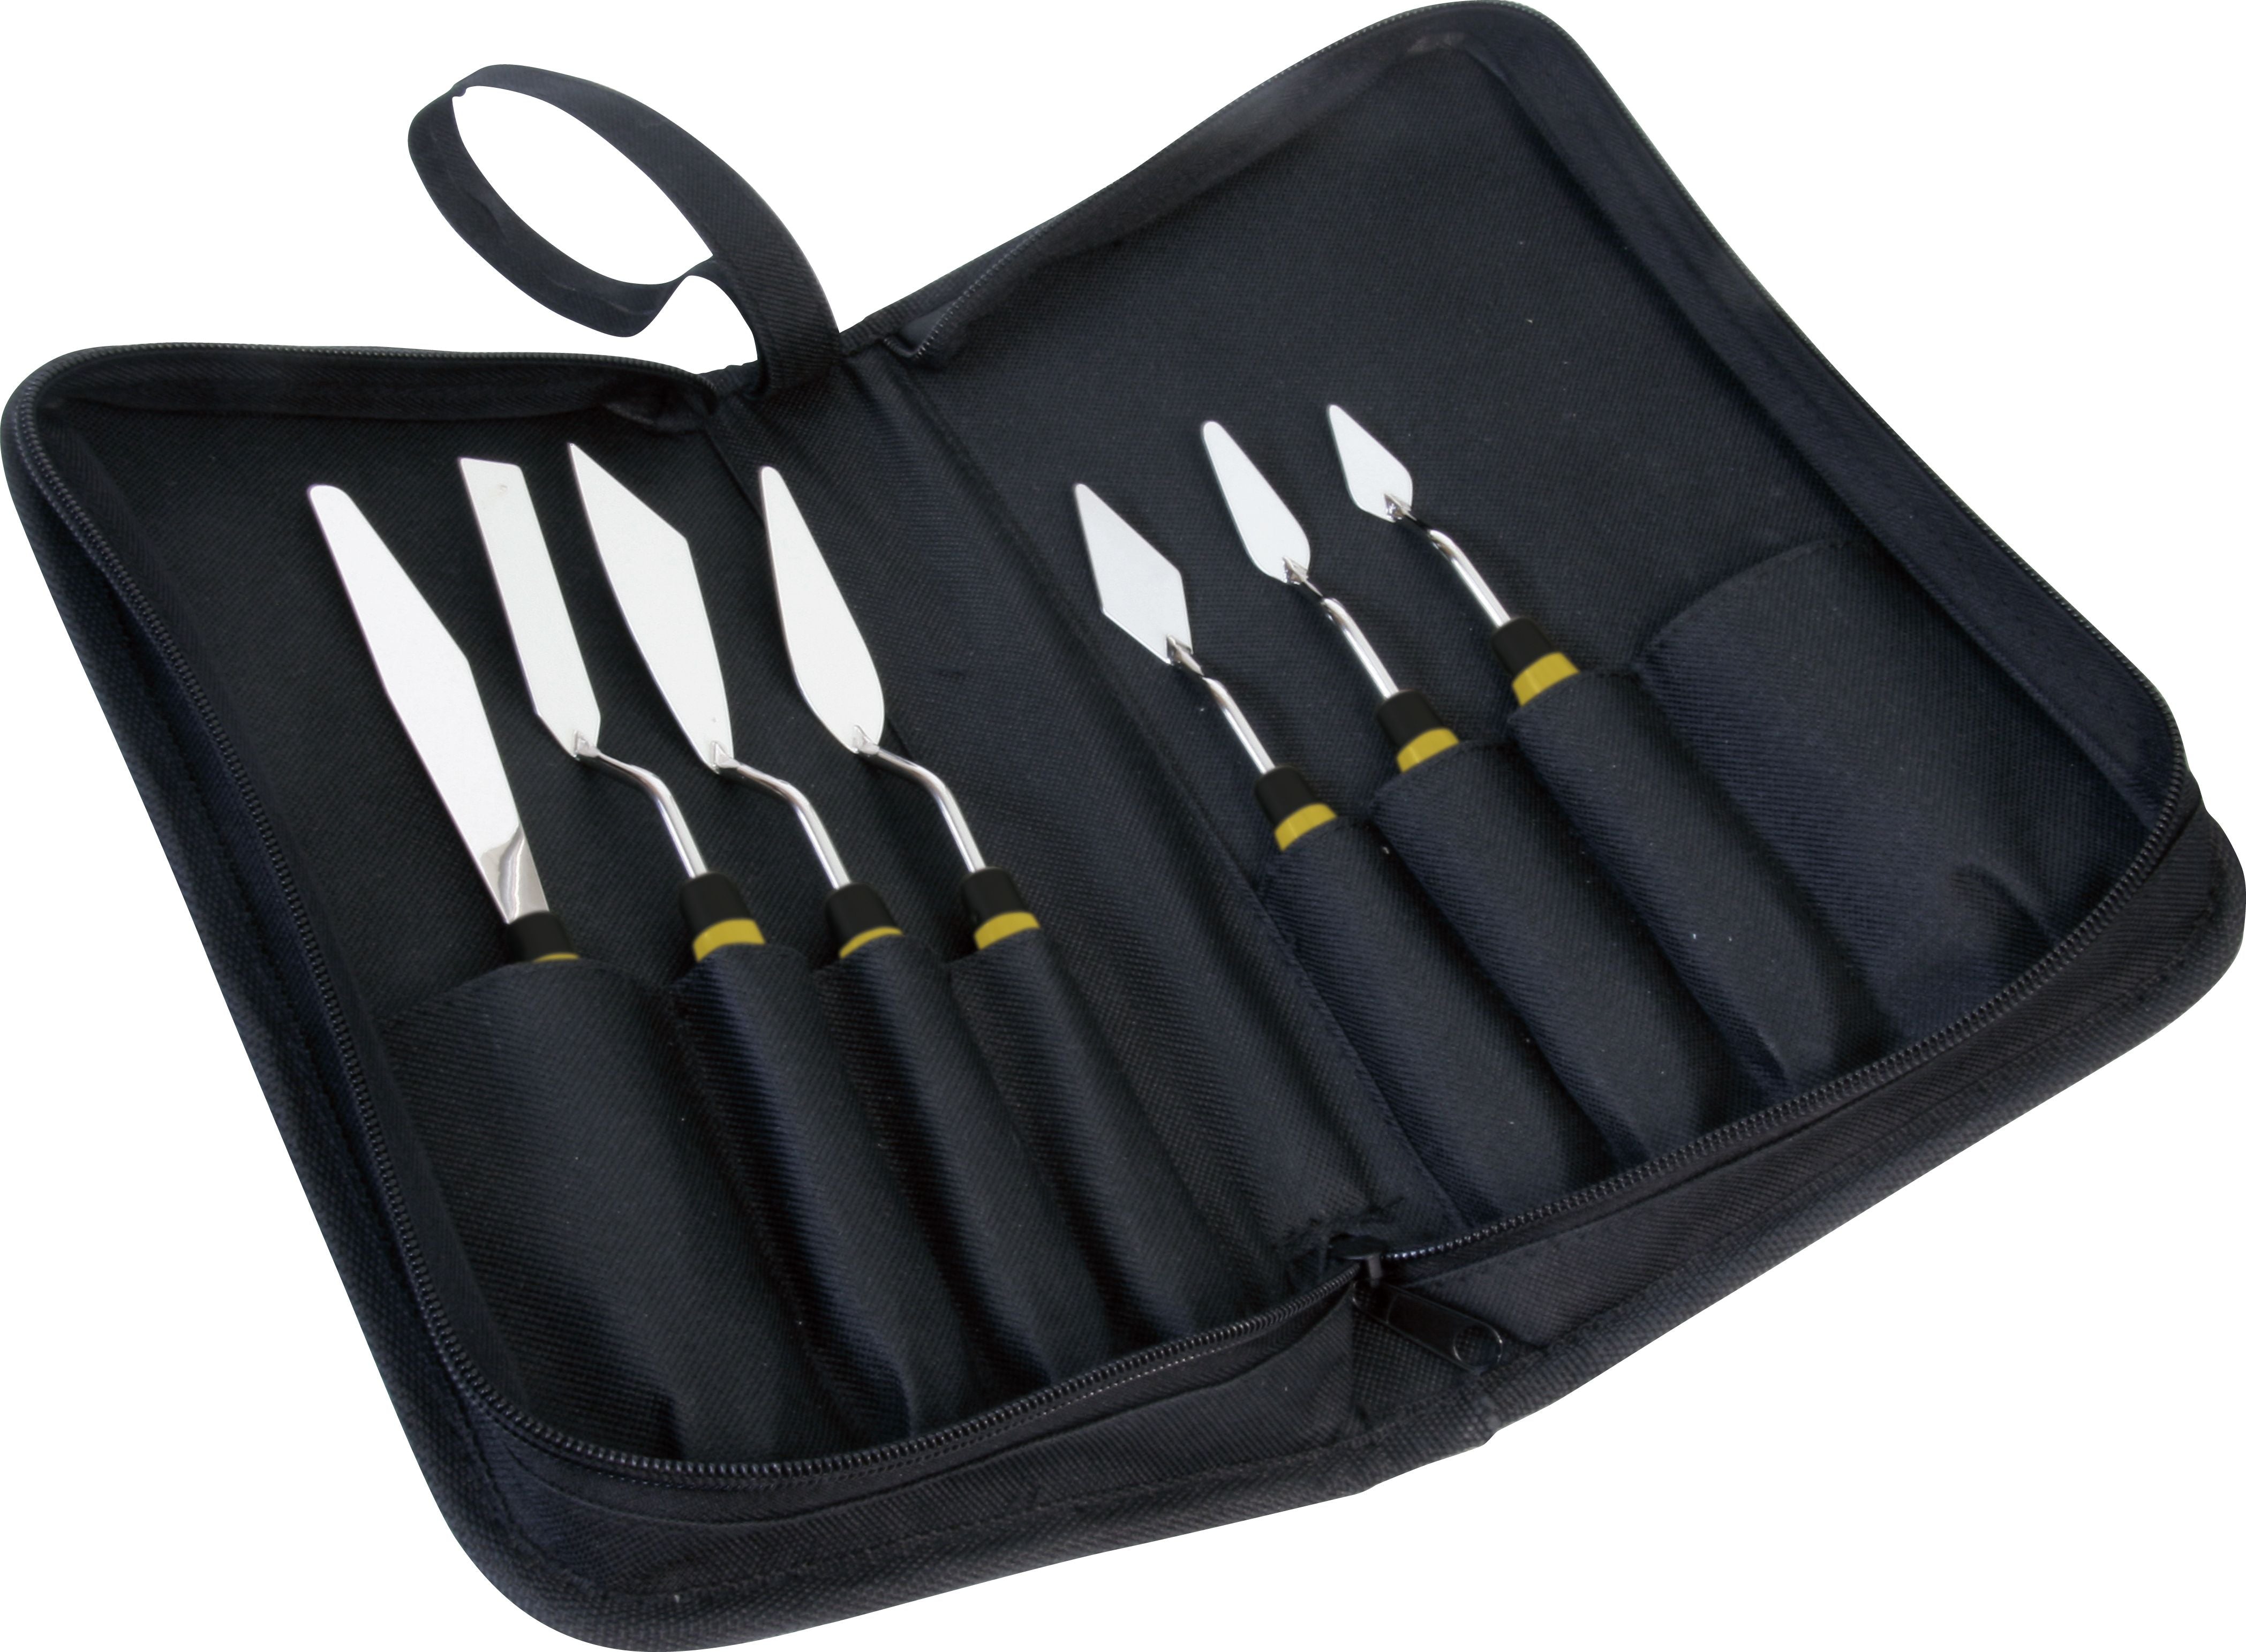 A great selection of palette knives from Daler Rowney, is a zipped case. 7 styles to use with acrylic or oil paints for paint application and creative techniques